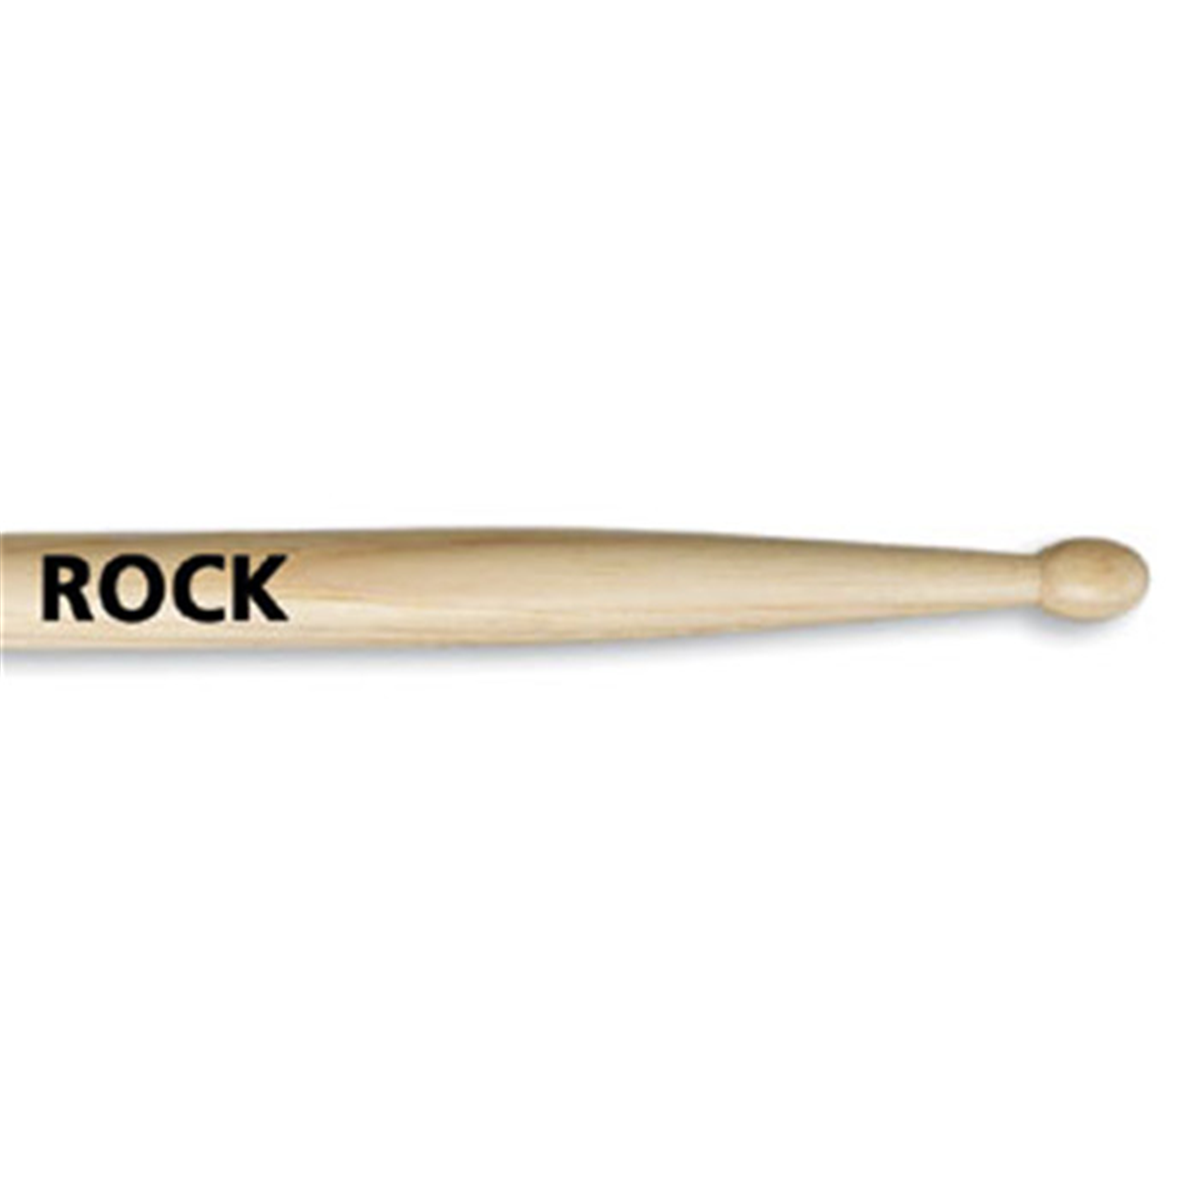 VIC FIRTH American Classic Hickory ROCK